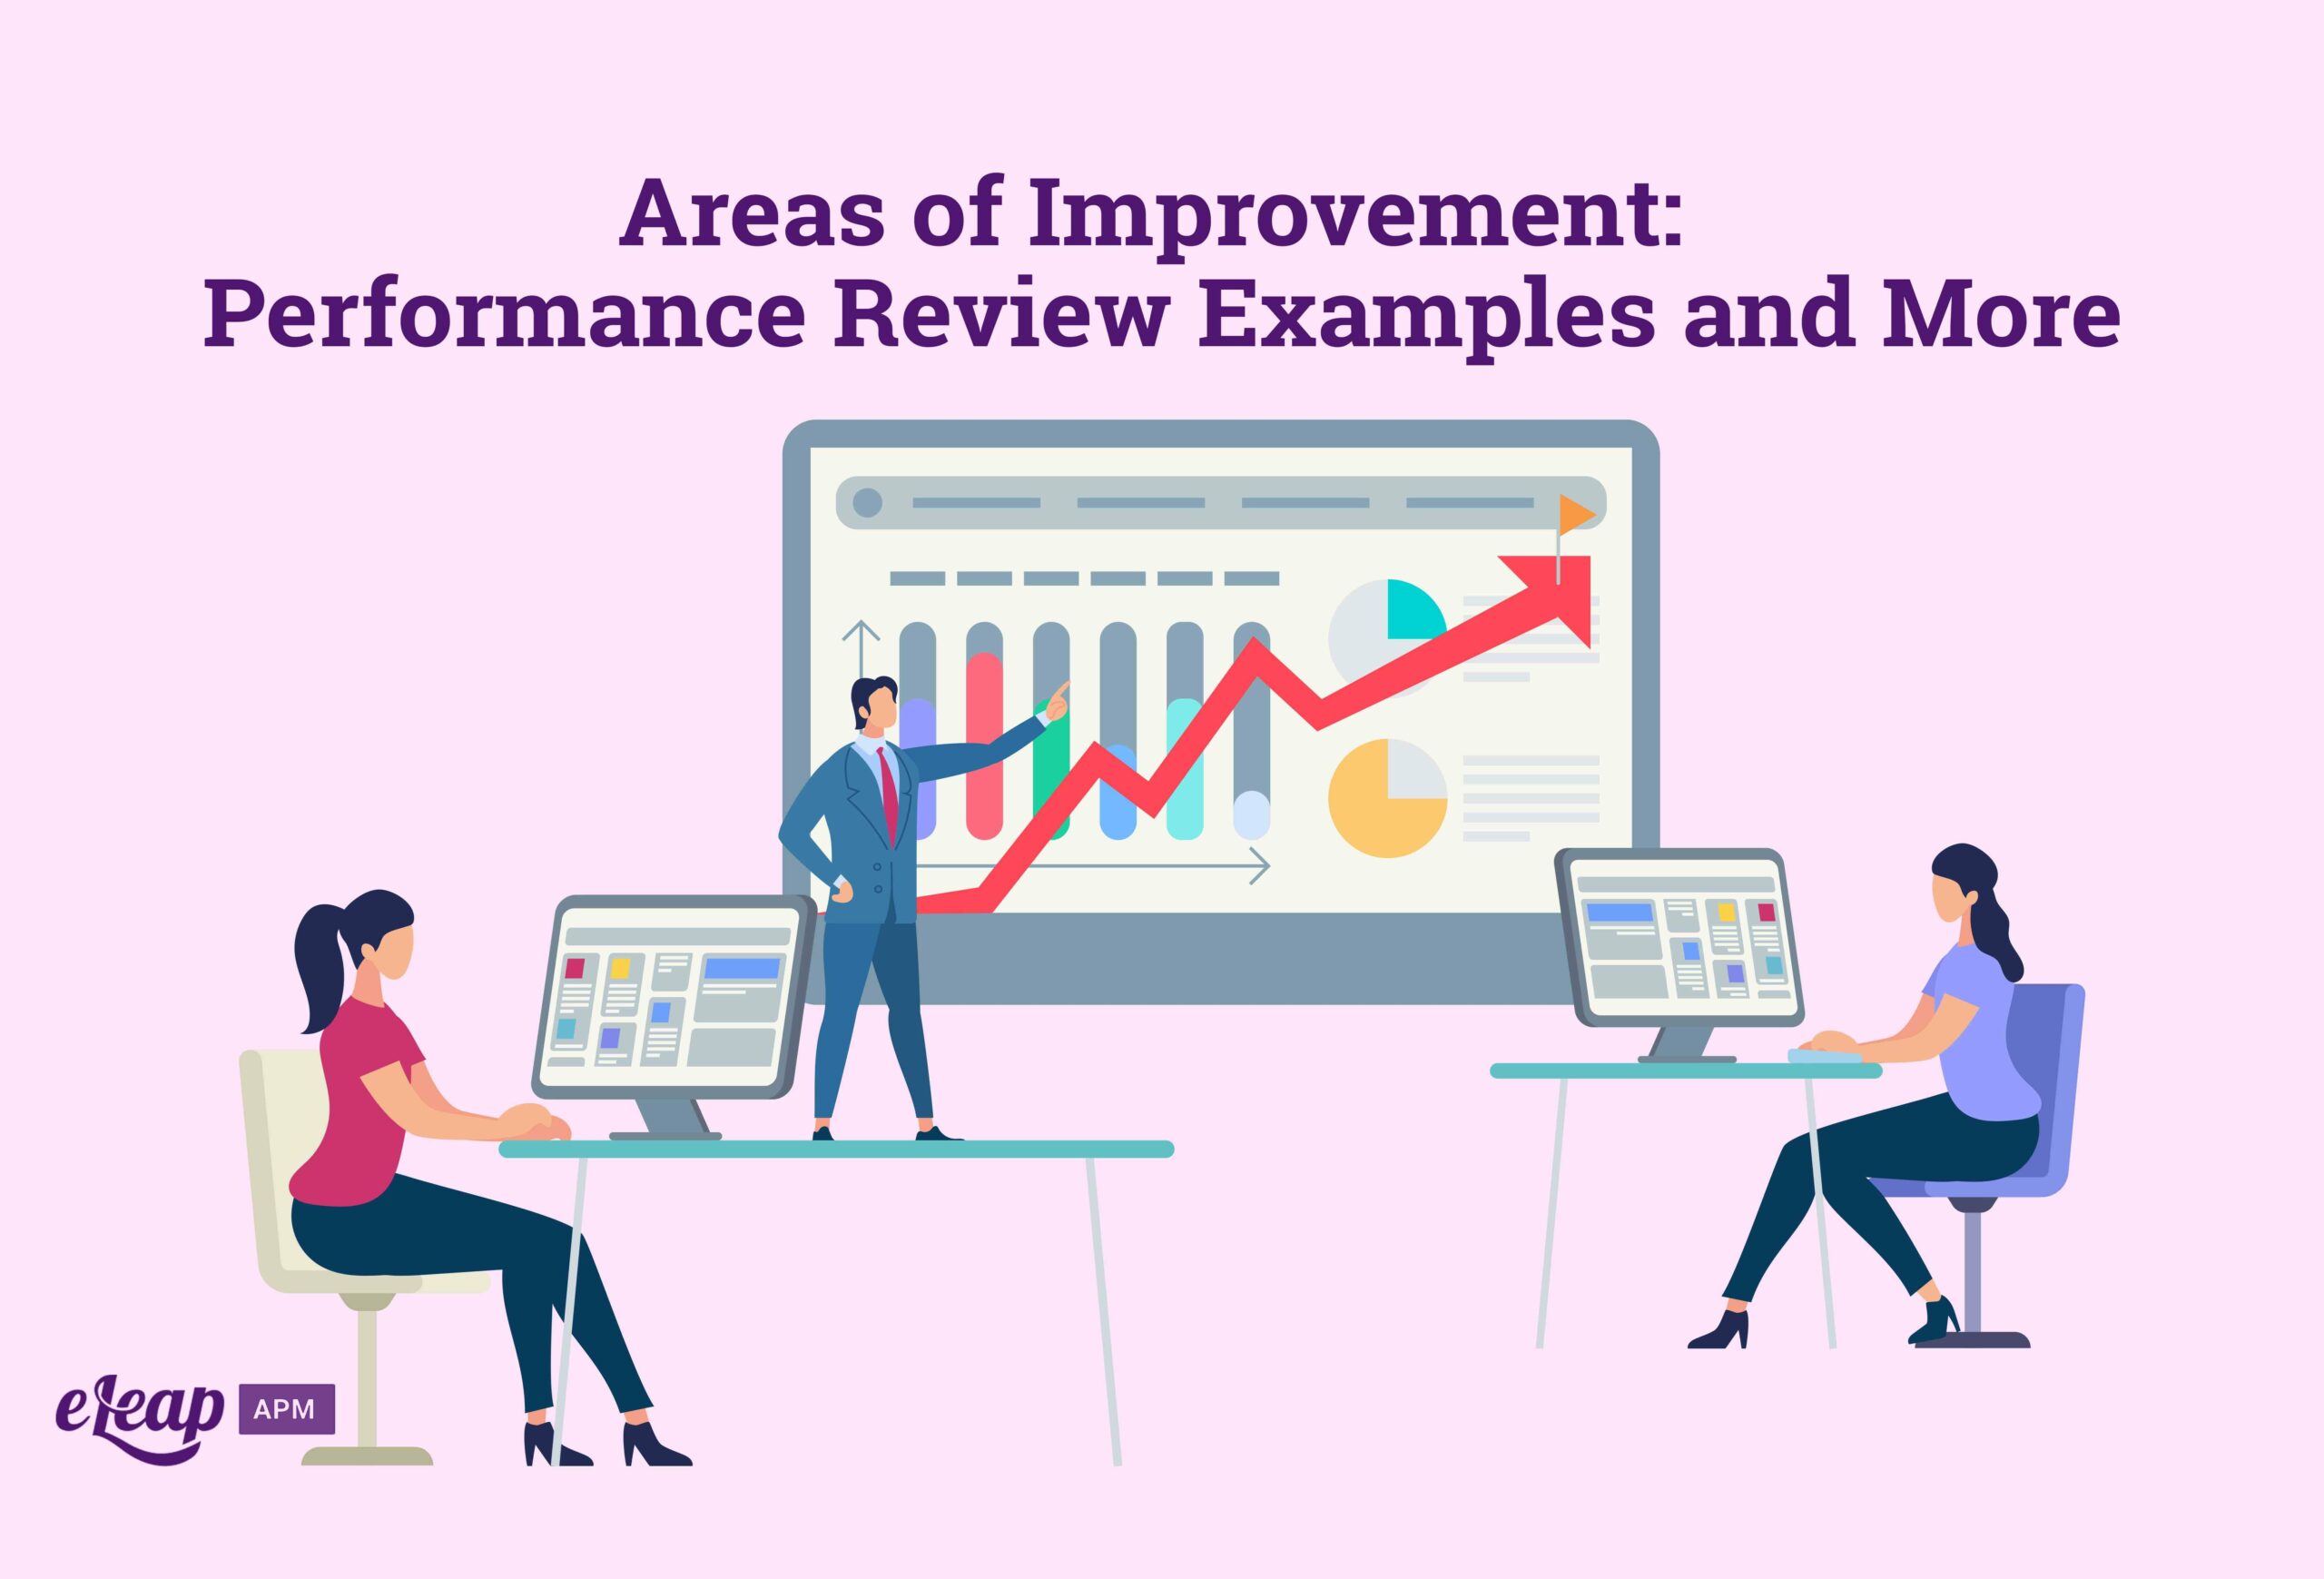 Areas of Improvement: Performance Review Examples and More